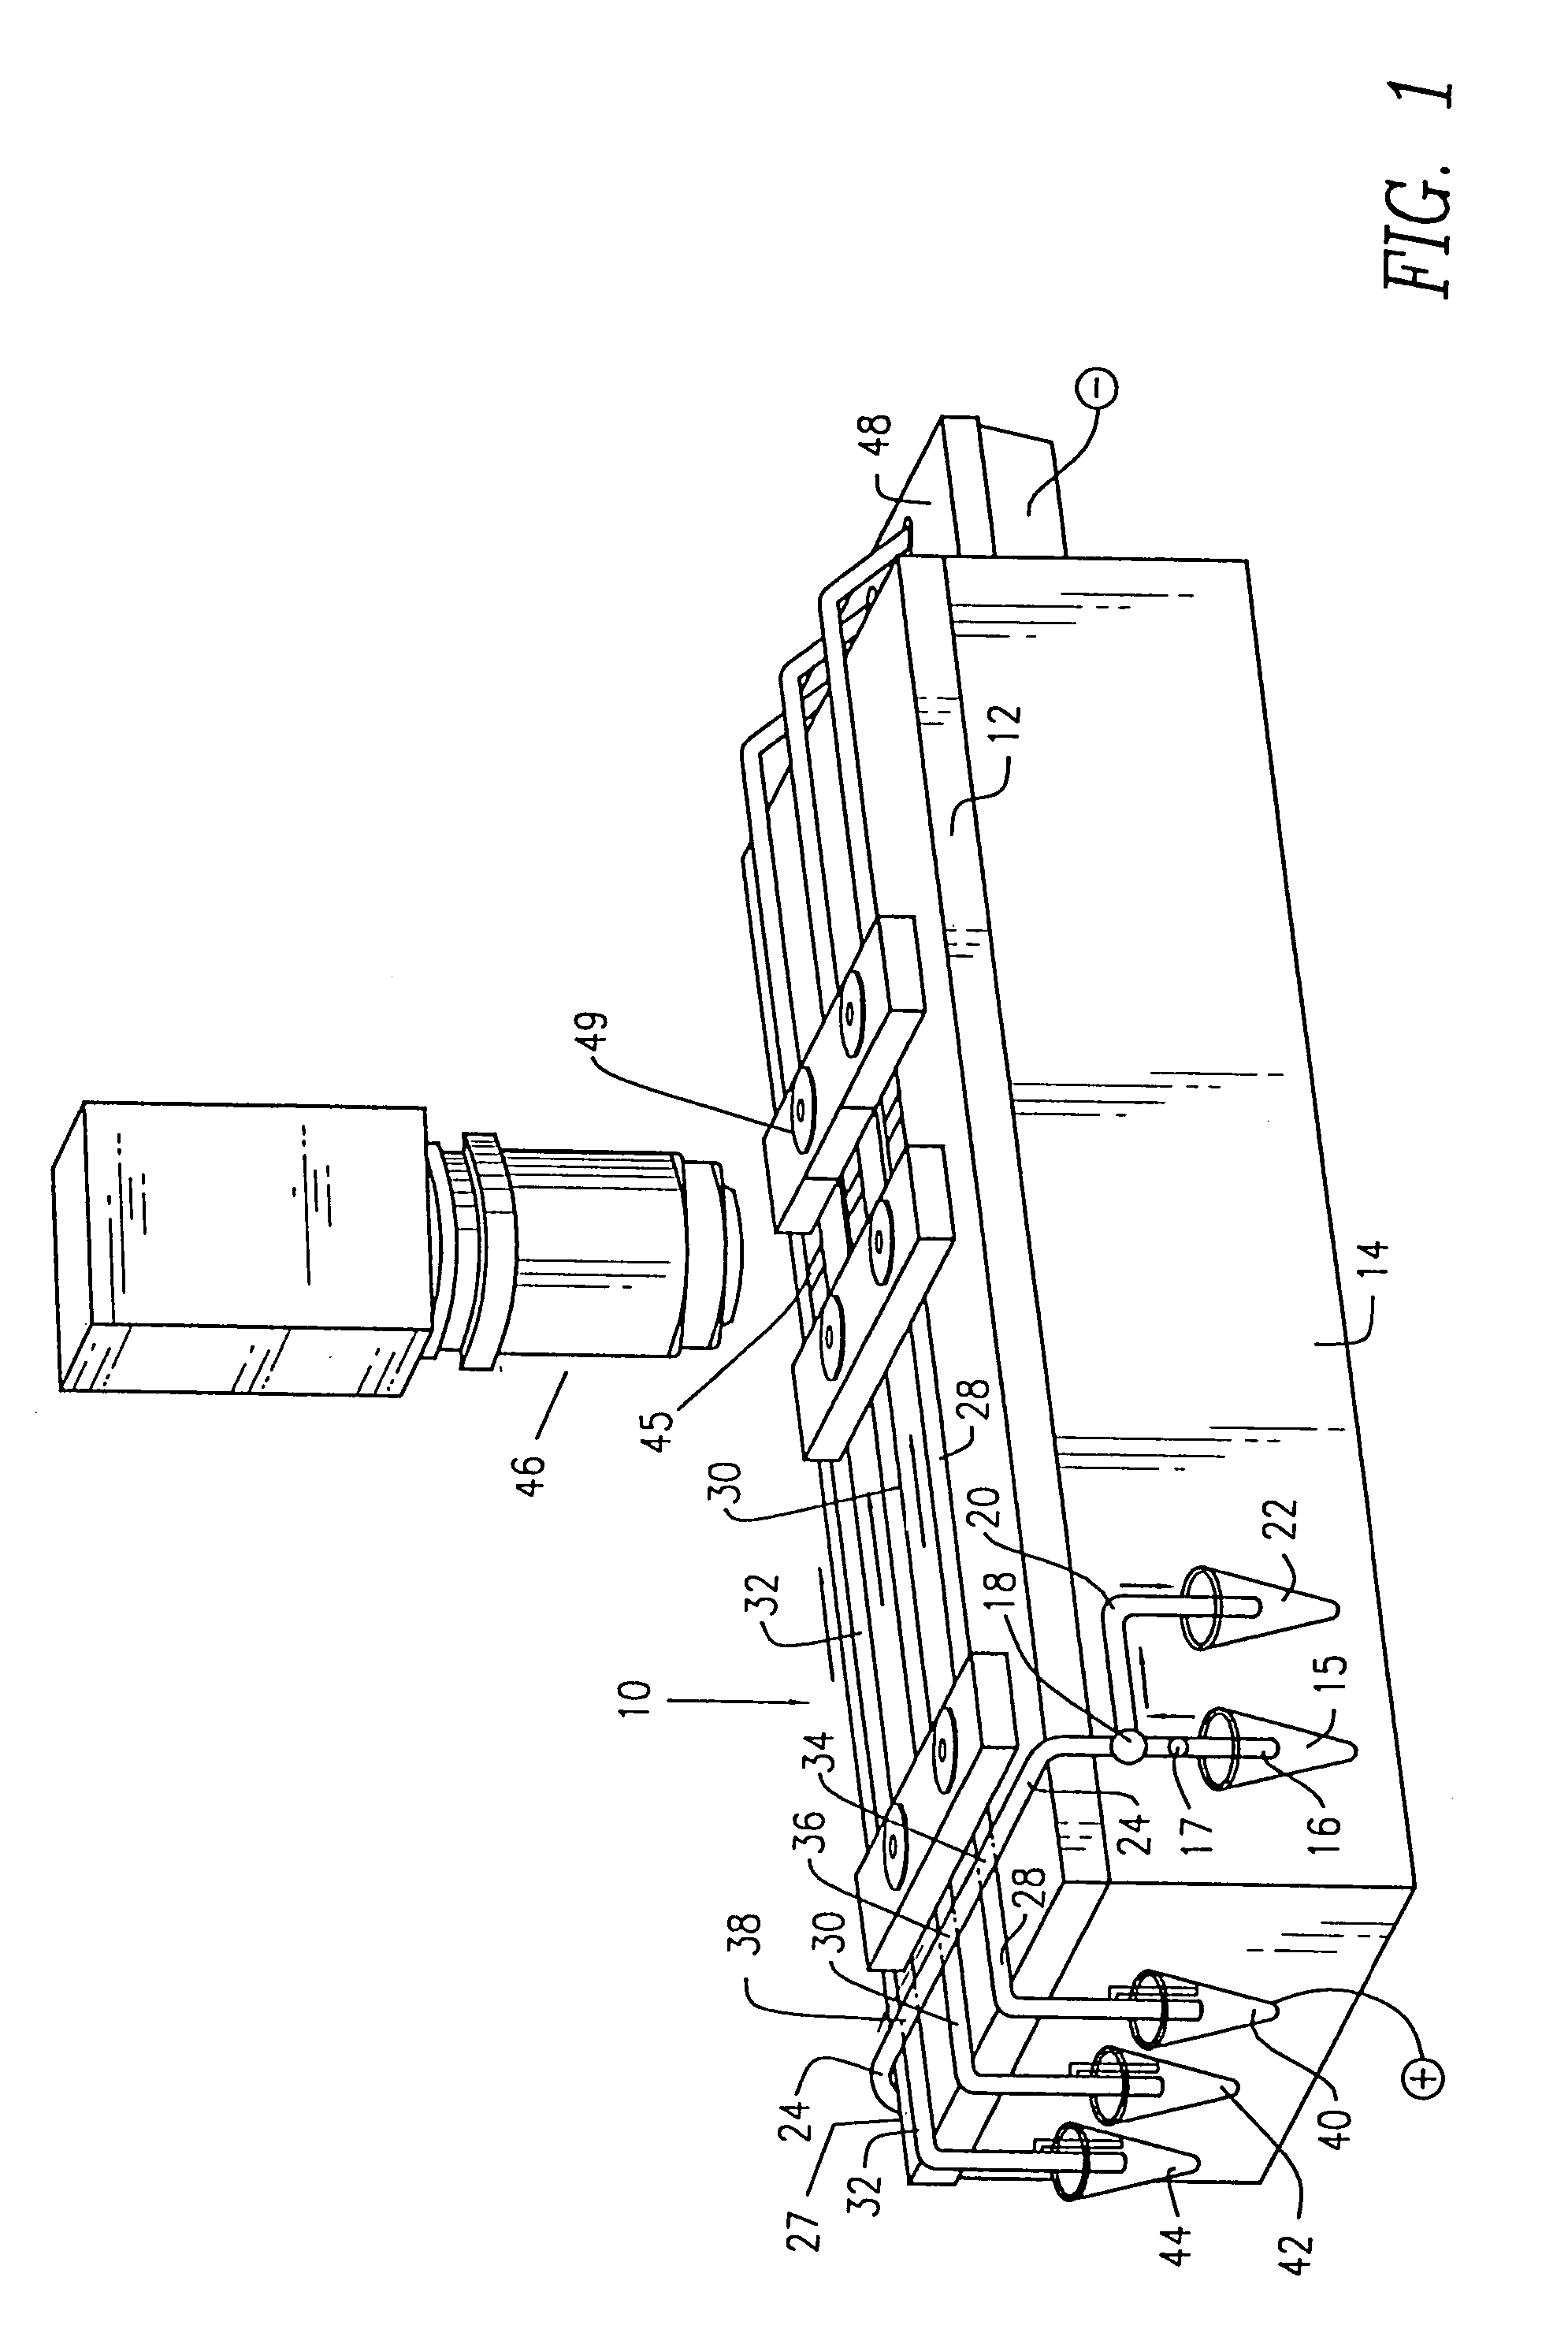 Electrophoresis apparatus having staggered passage configuration